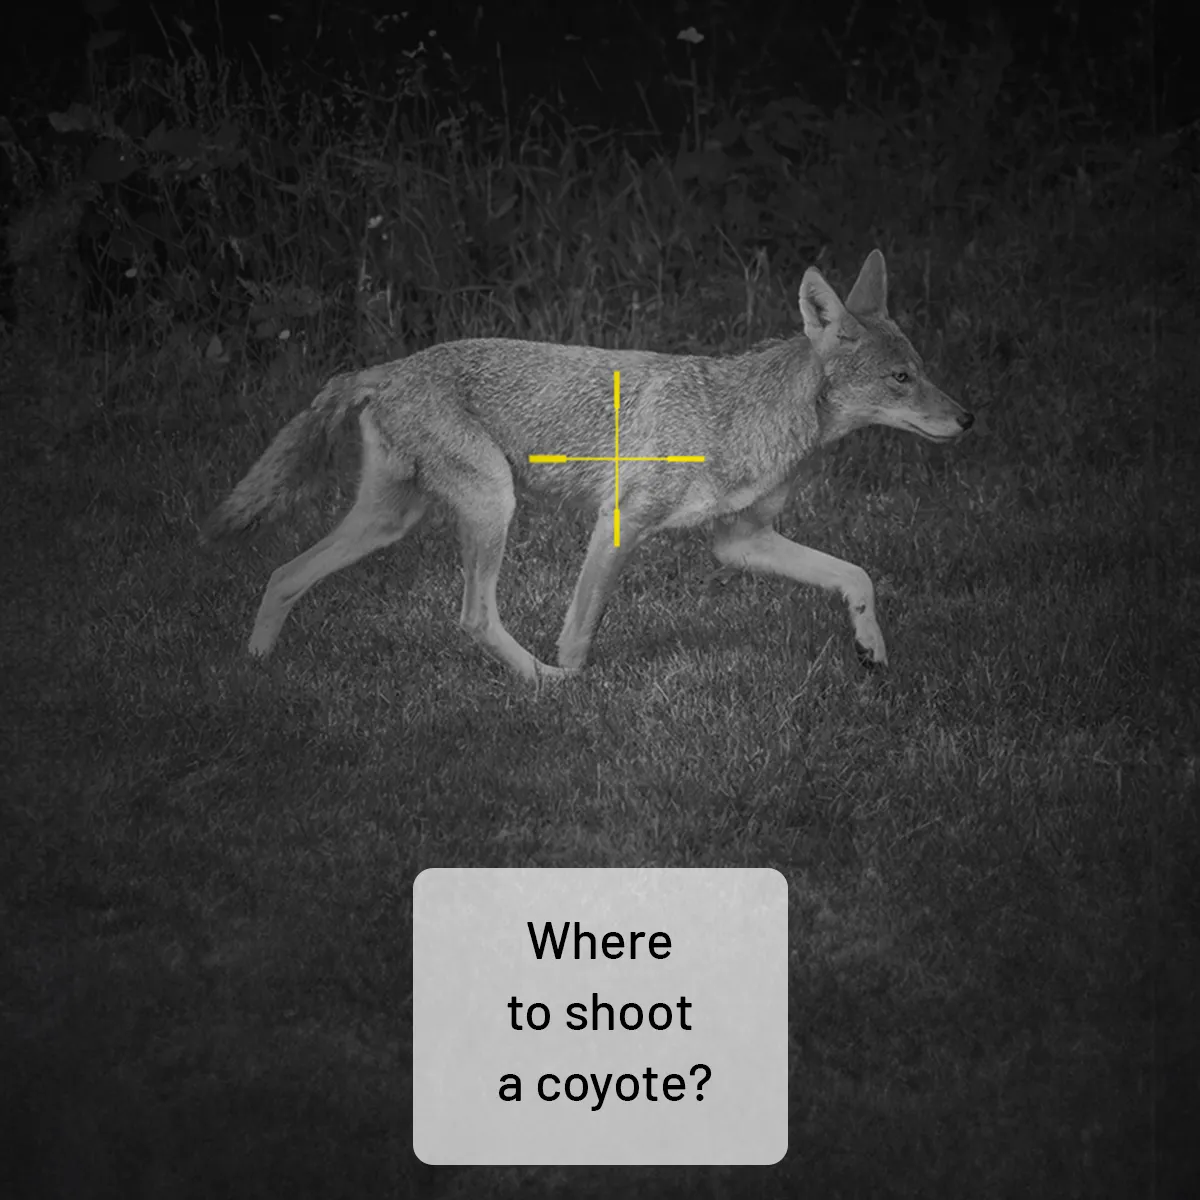 Where to shoot a coyote?